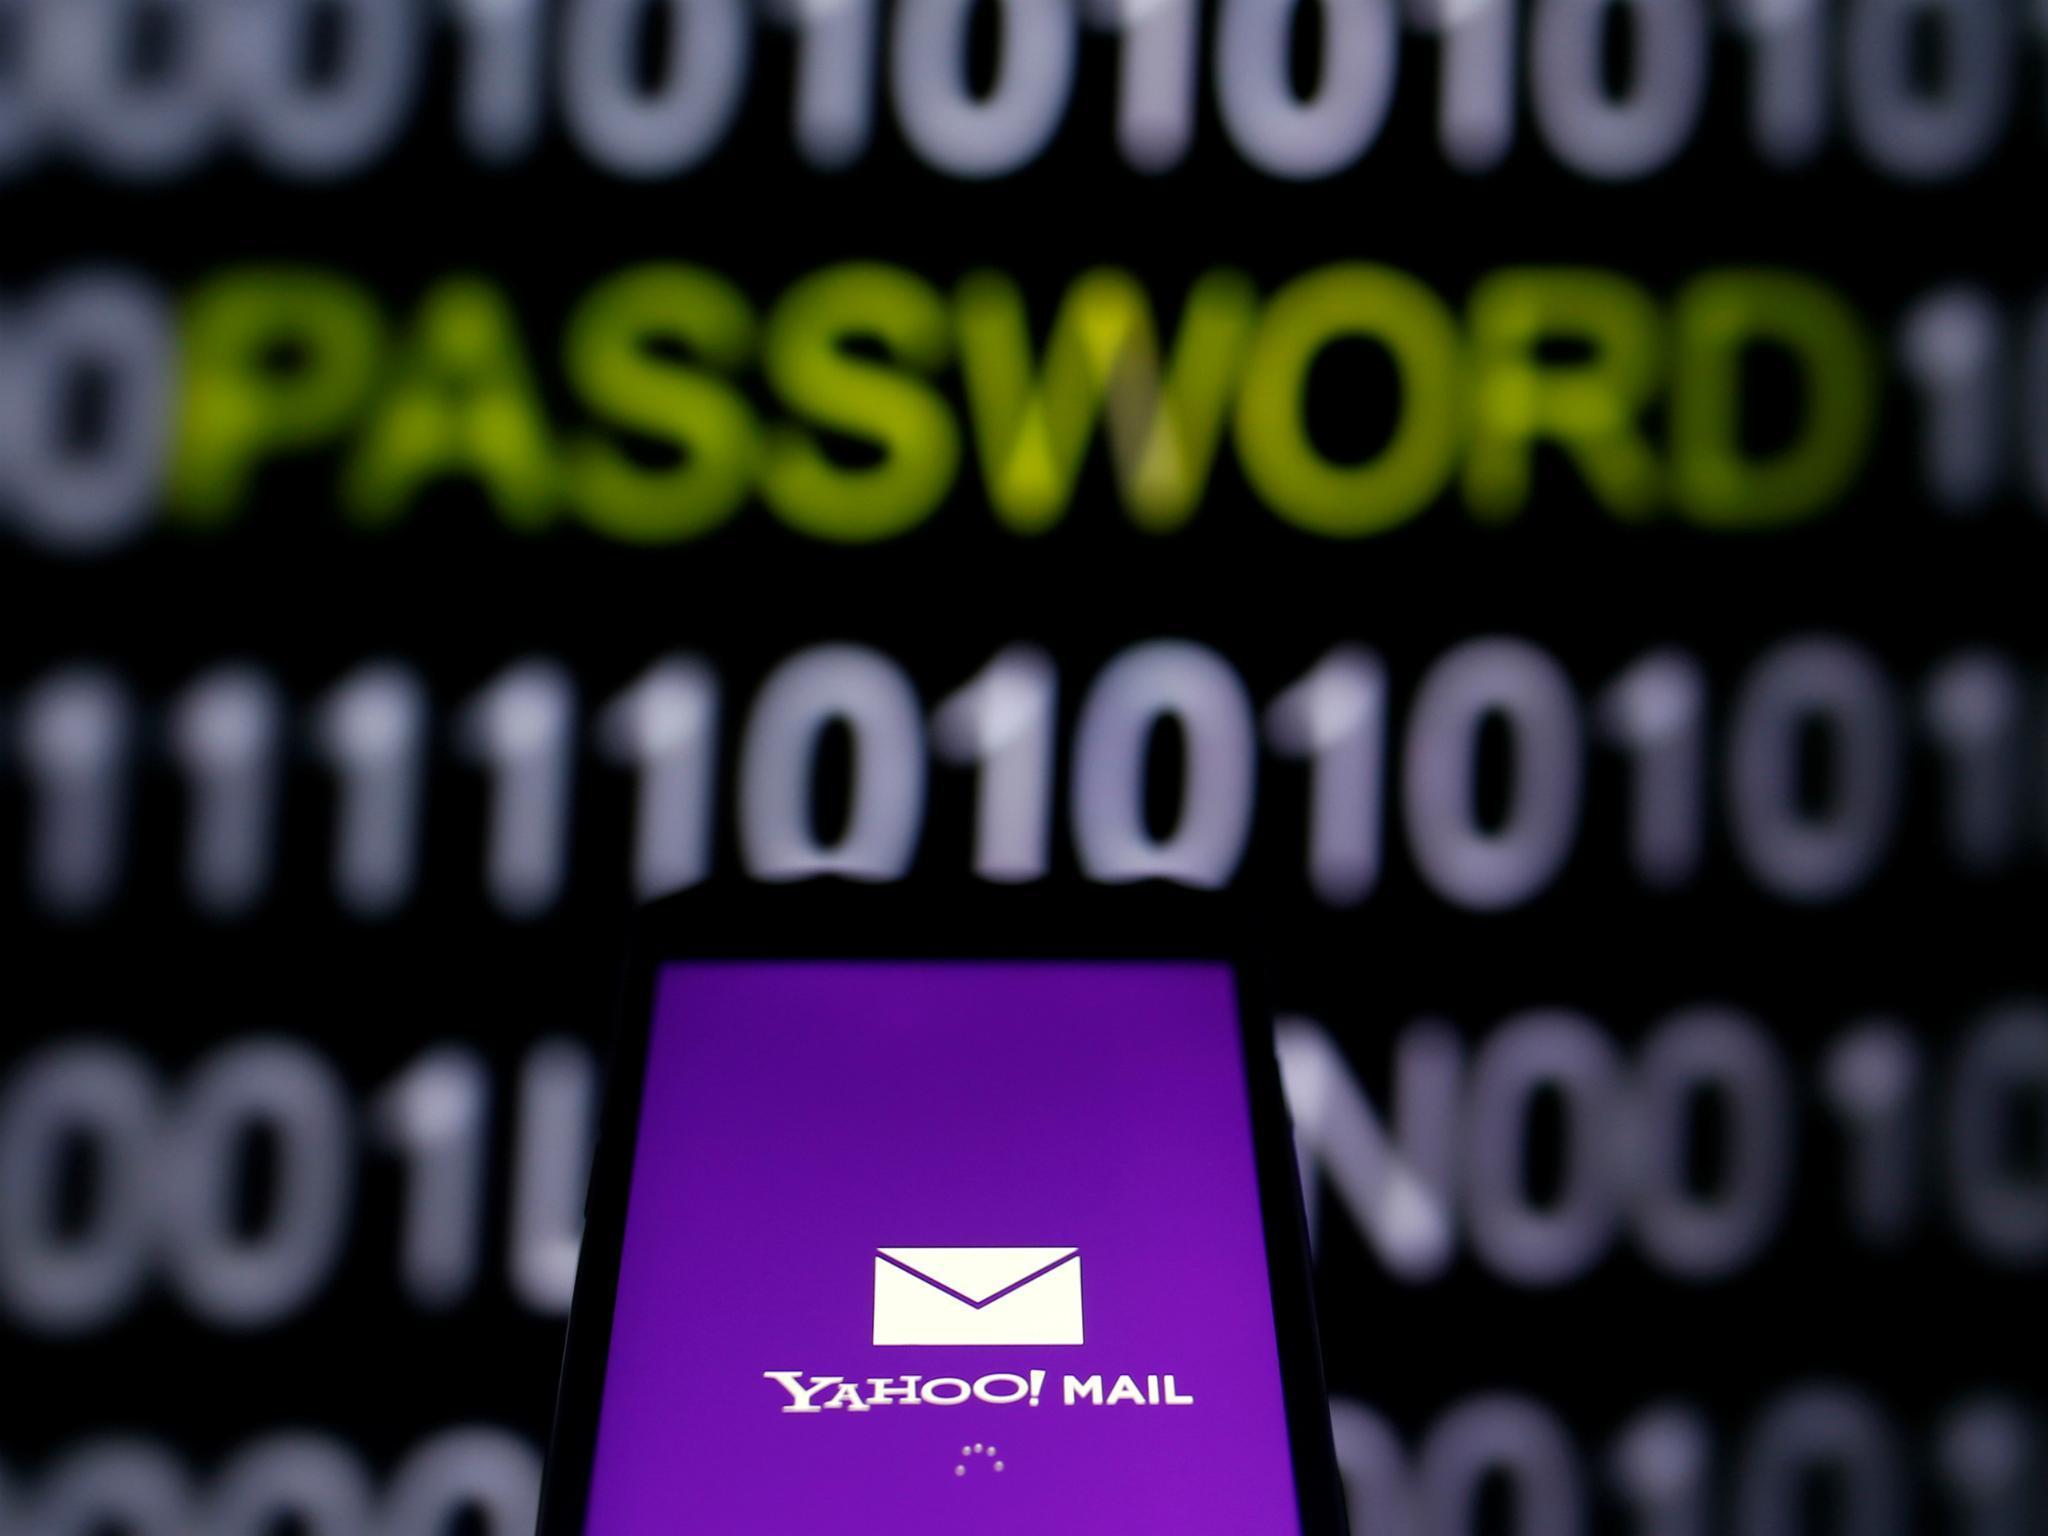 Yahoo Mail logo is displayed on a smartphone's screen in front of a code in this illustration taken in October 6, 2016